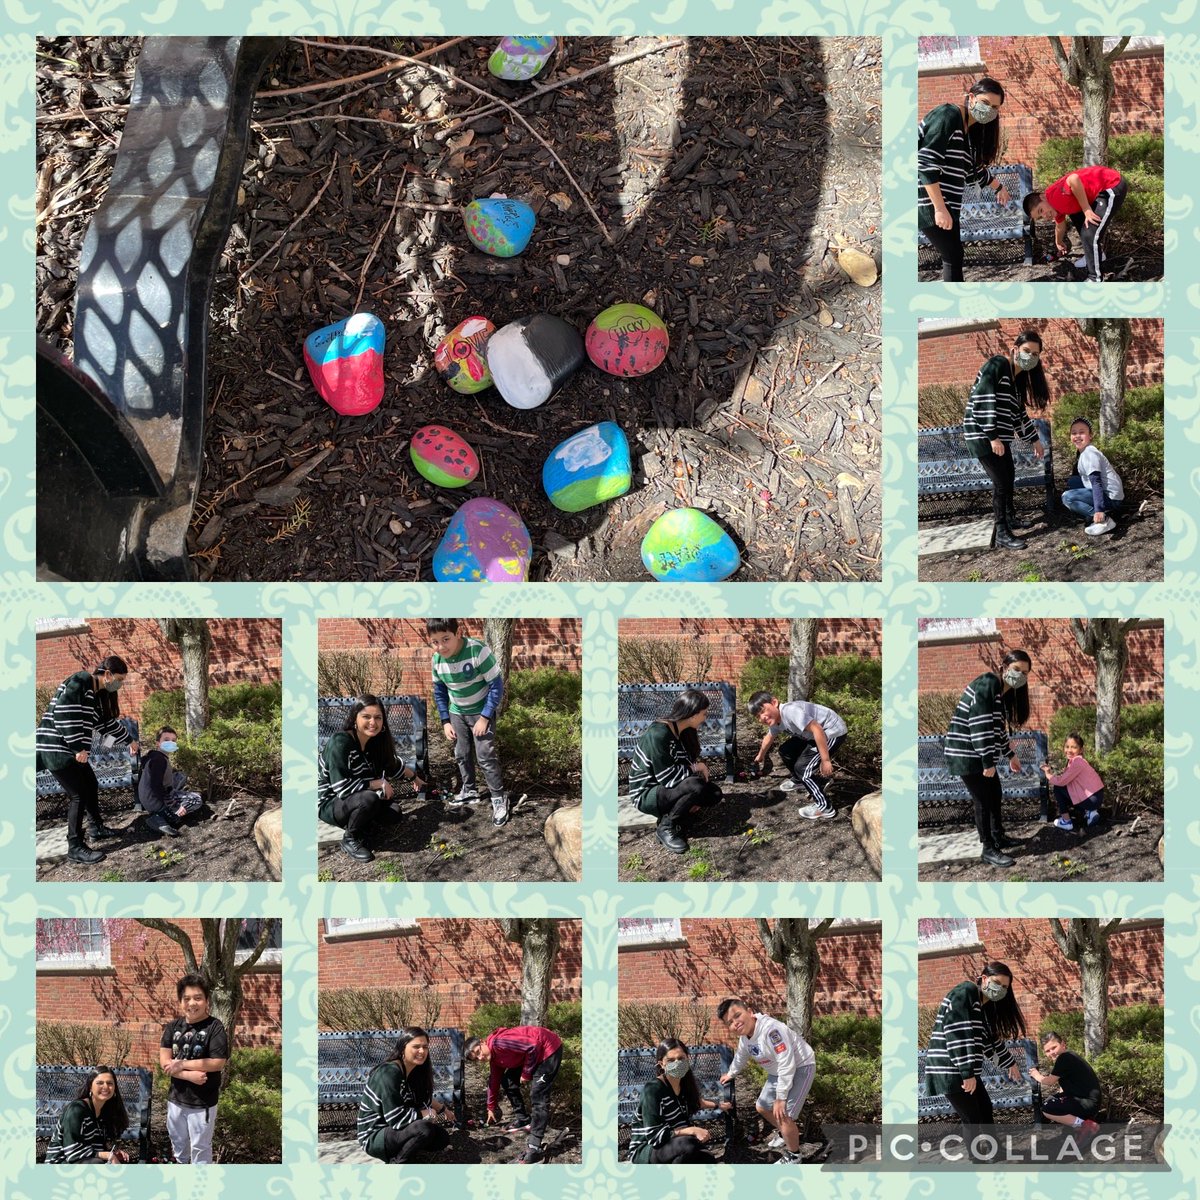 The Learners at 209 painted kindness rocks to show empathy and paced them in a kindness garden ⁦⁦@Jackson_Ave⁩ #MineolaProud #MineolaGrows #Jackson21 ⁦@JenniferWeisbe2⁩